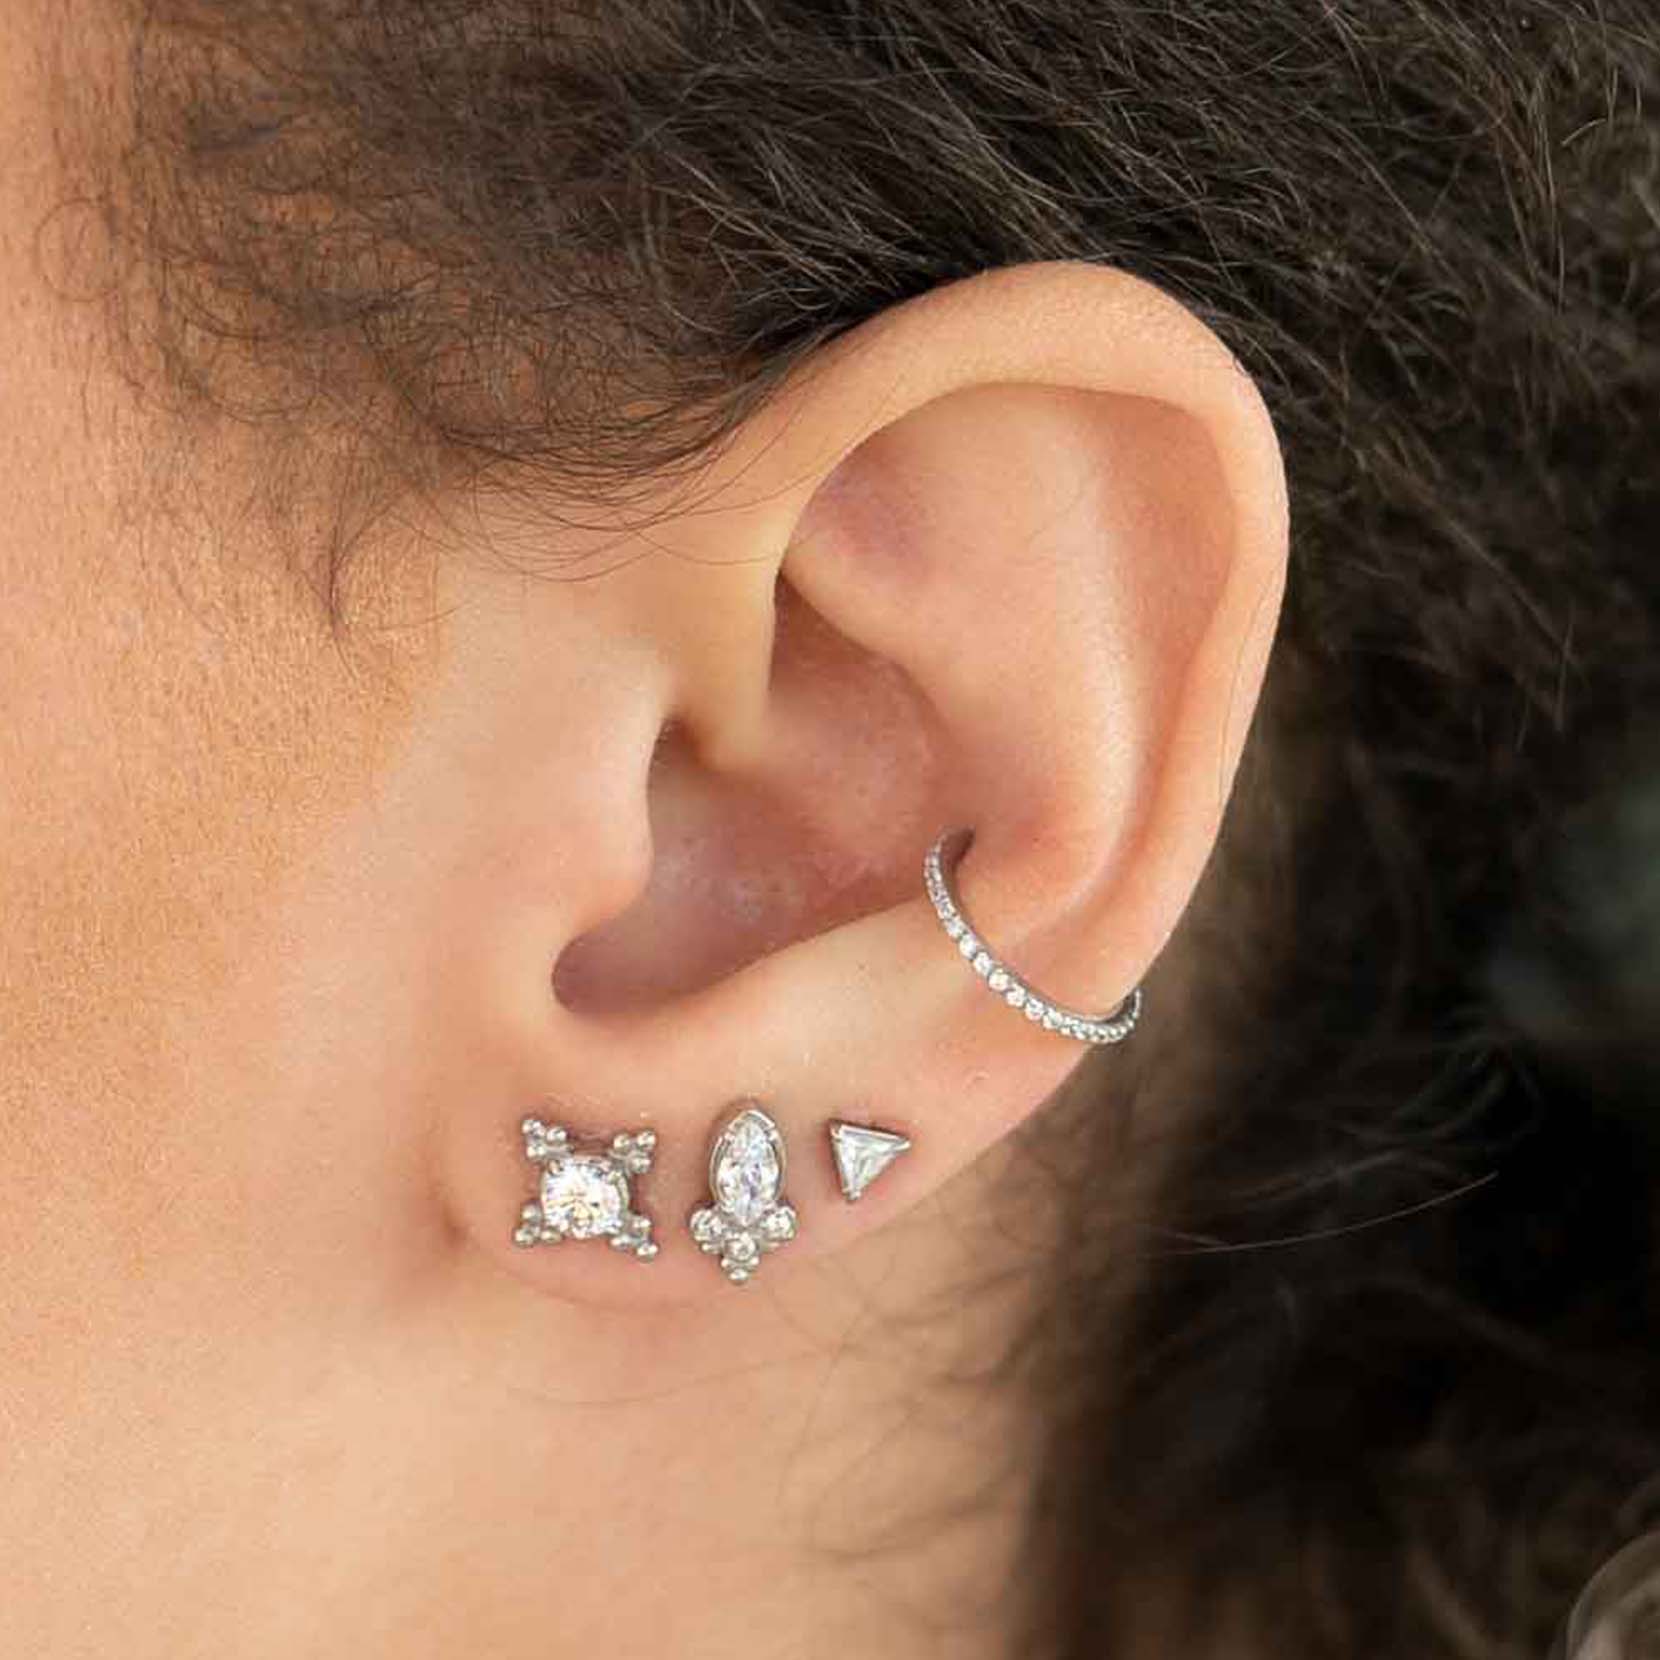 STEEL EARRINGS YOU WILL WANT TO STEAL